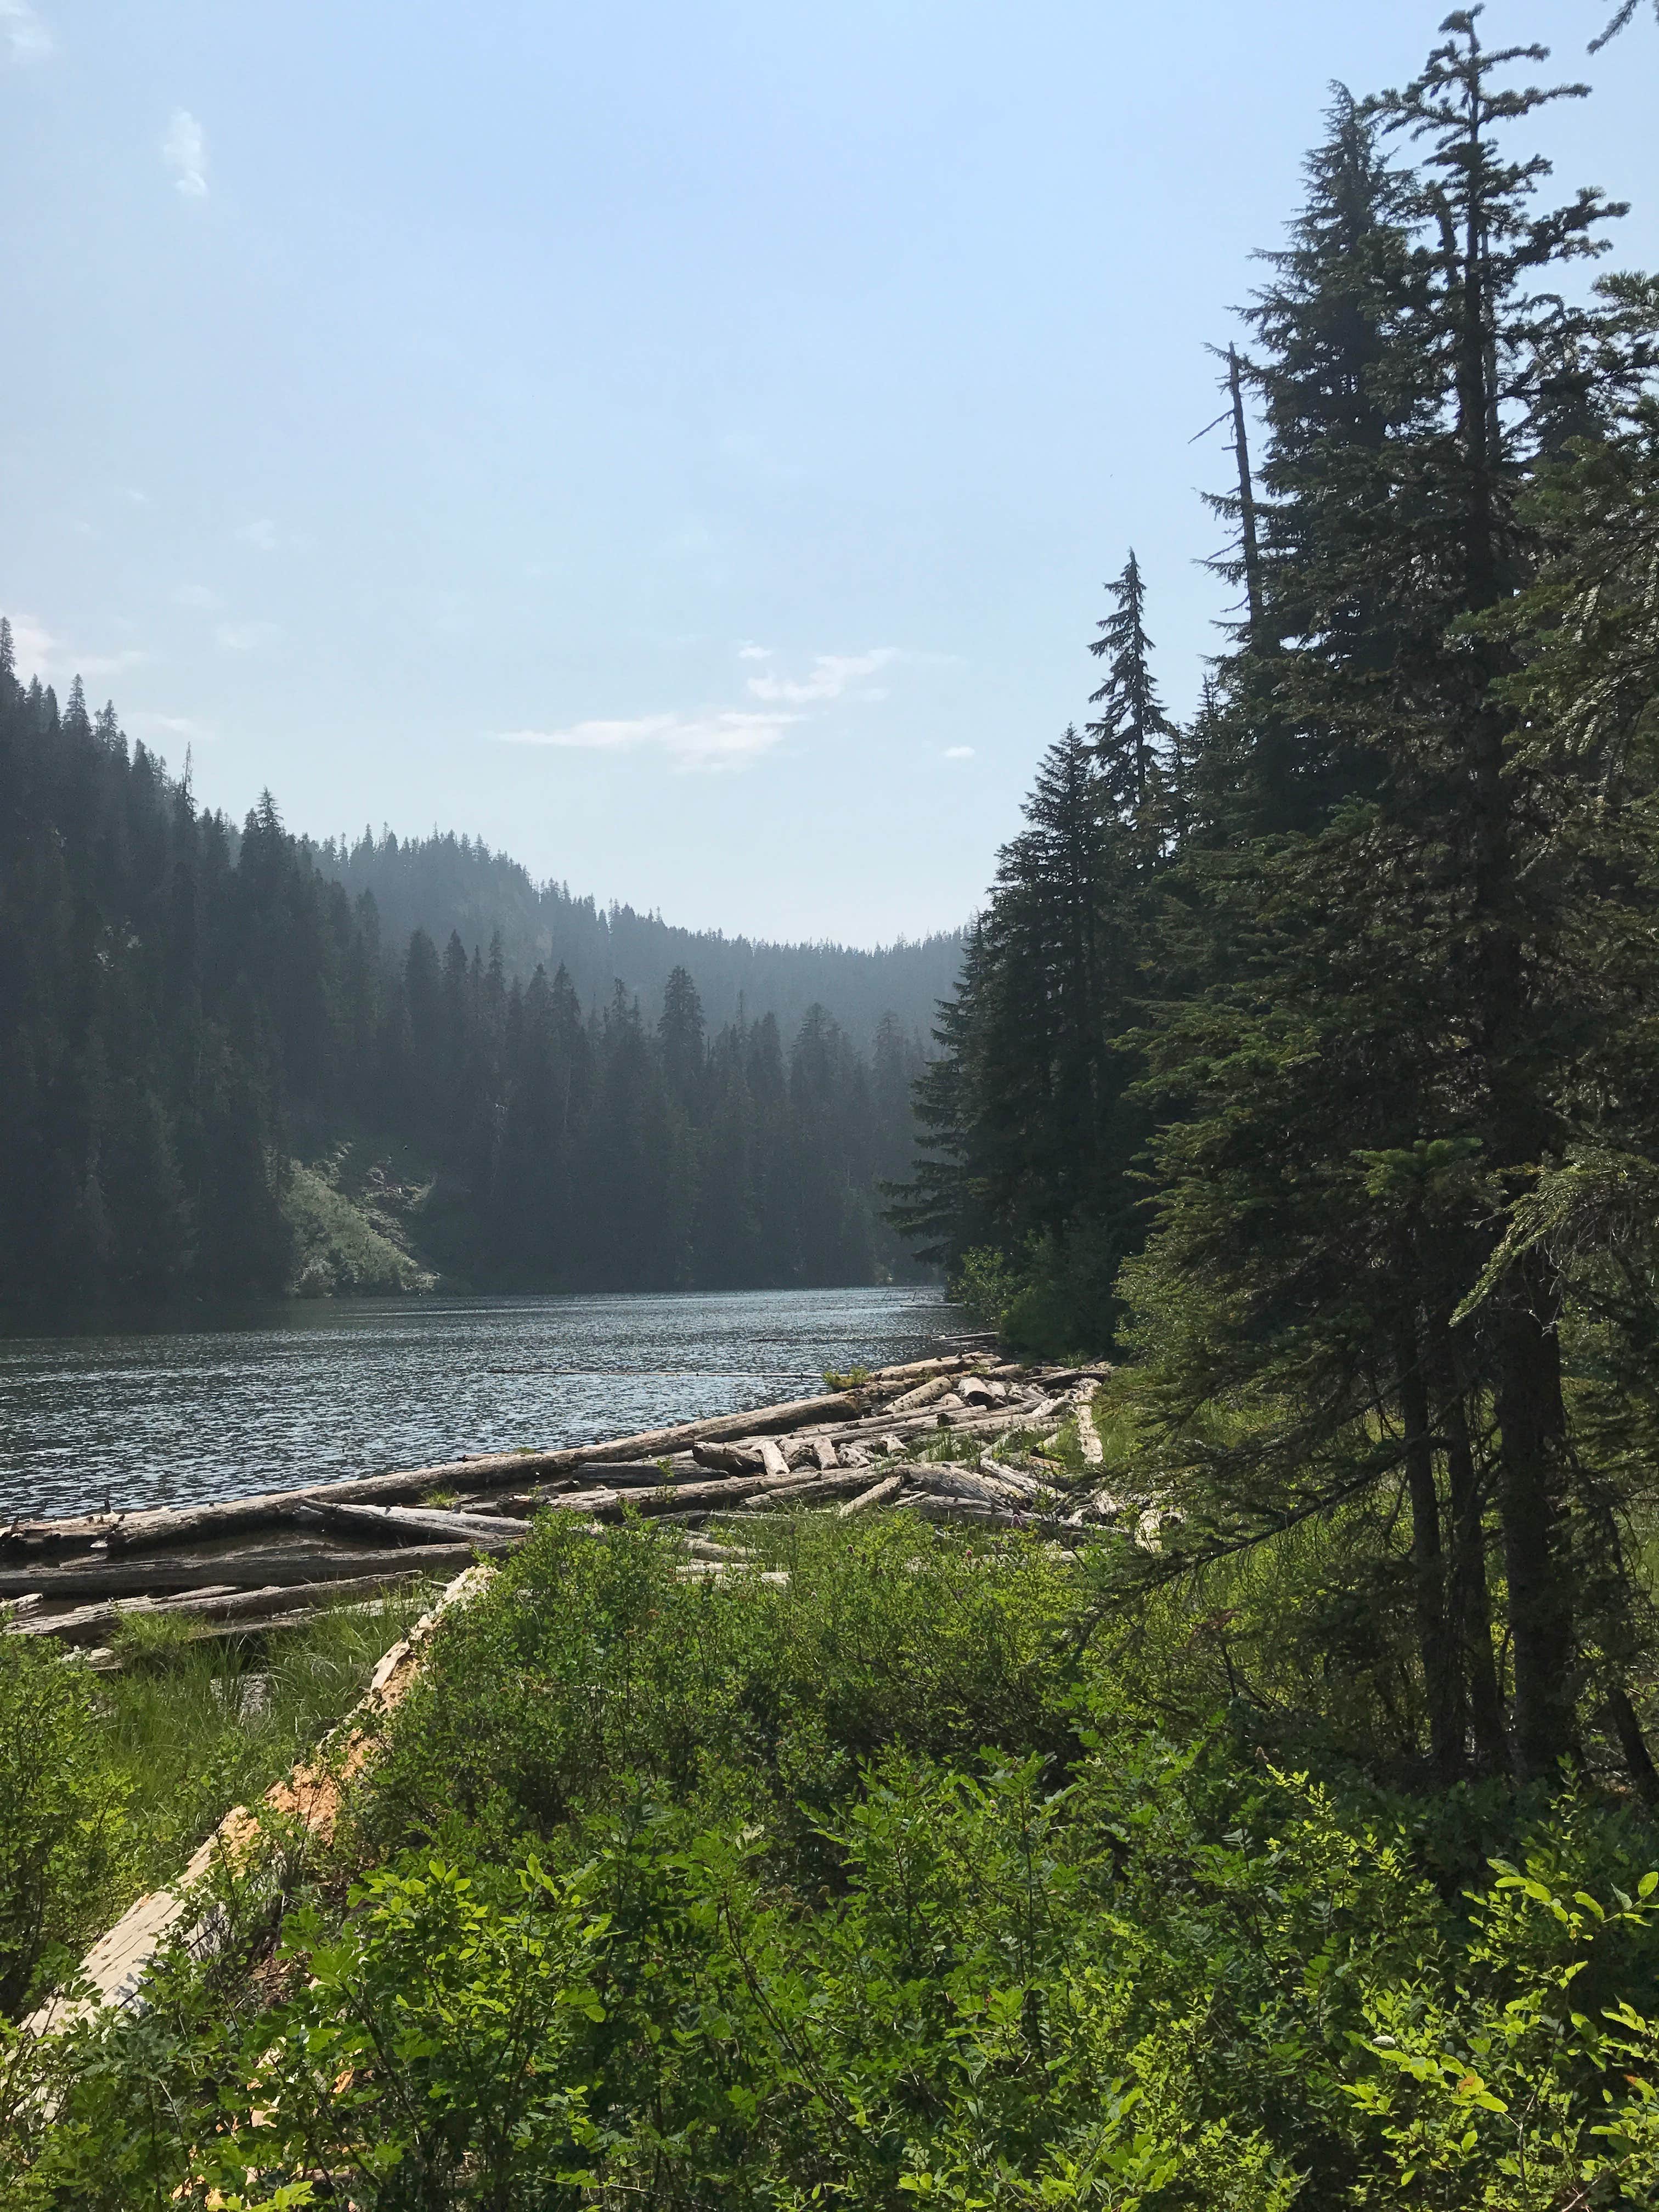 Camper submitted image from Serene Lake - 2